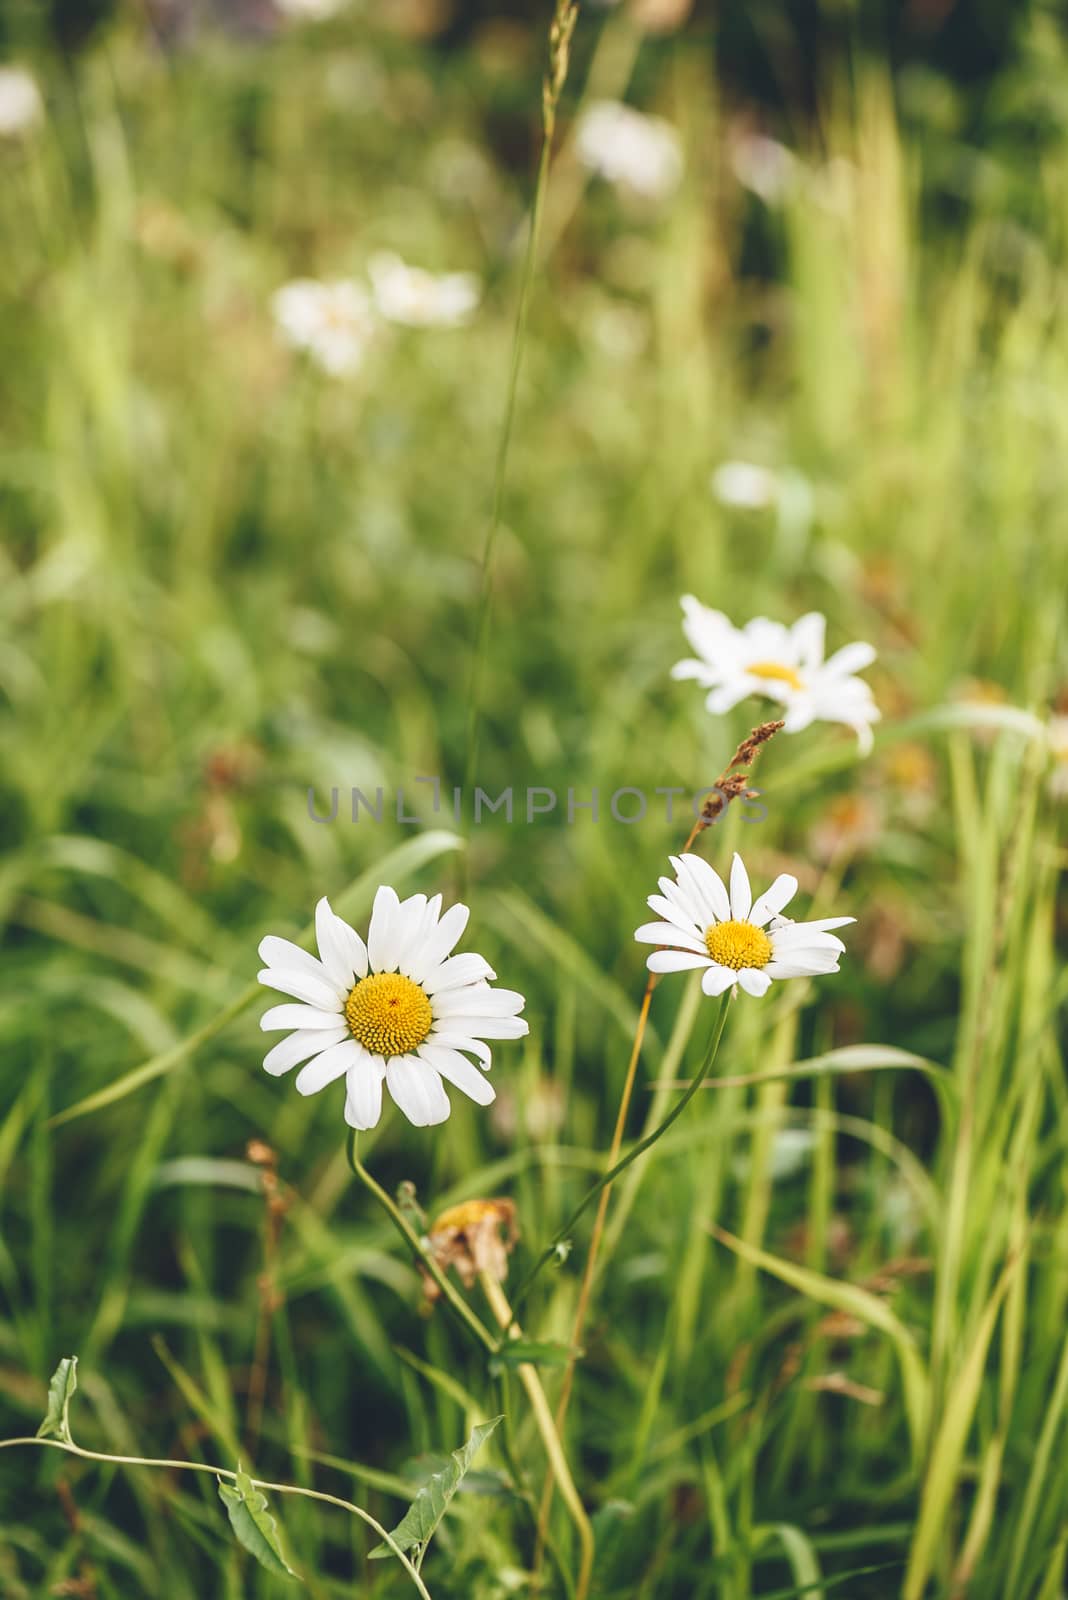 Daisy Flowers on Lawn at Sunny Day. Blurred Background.